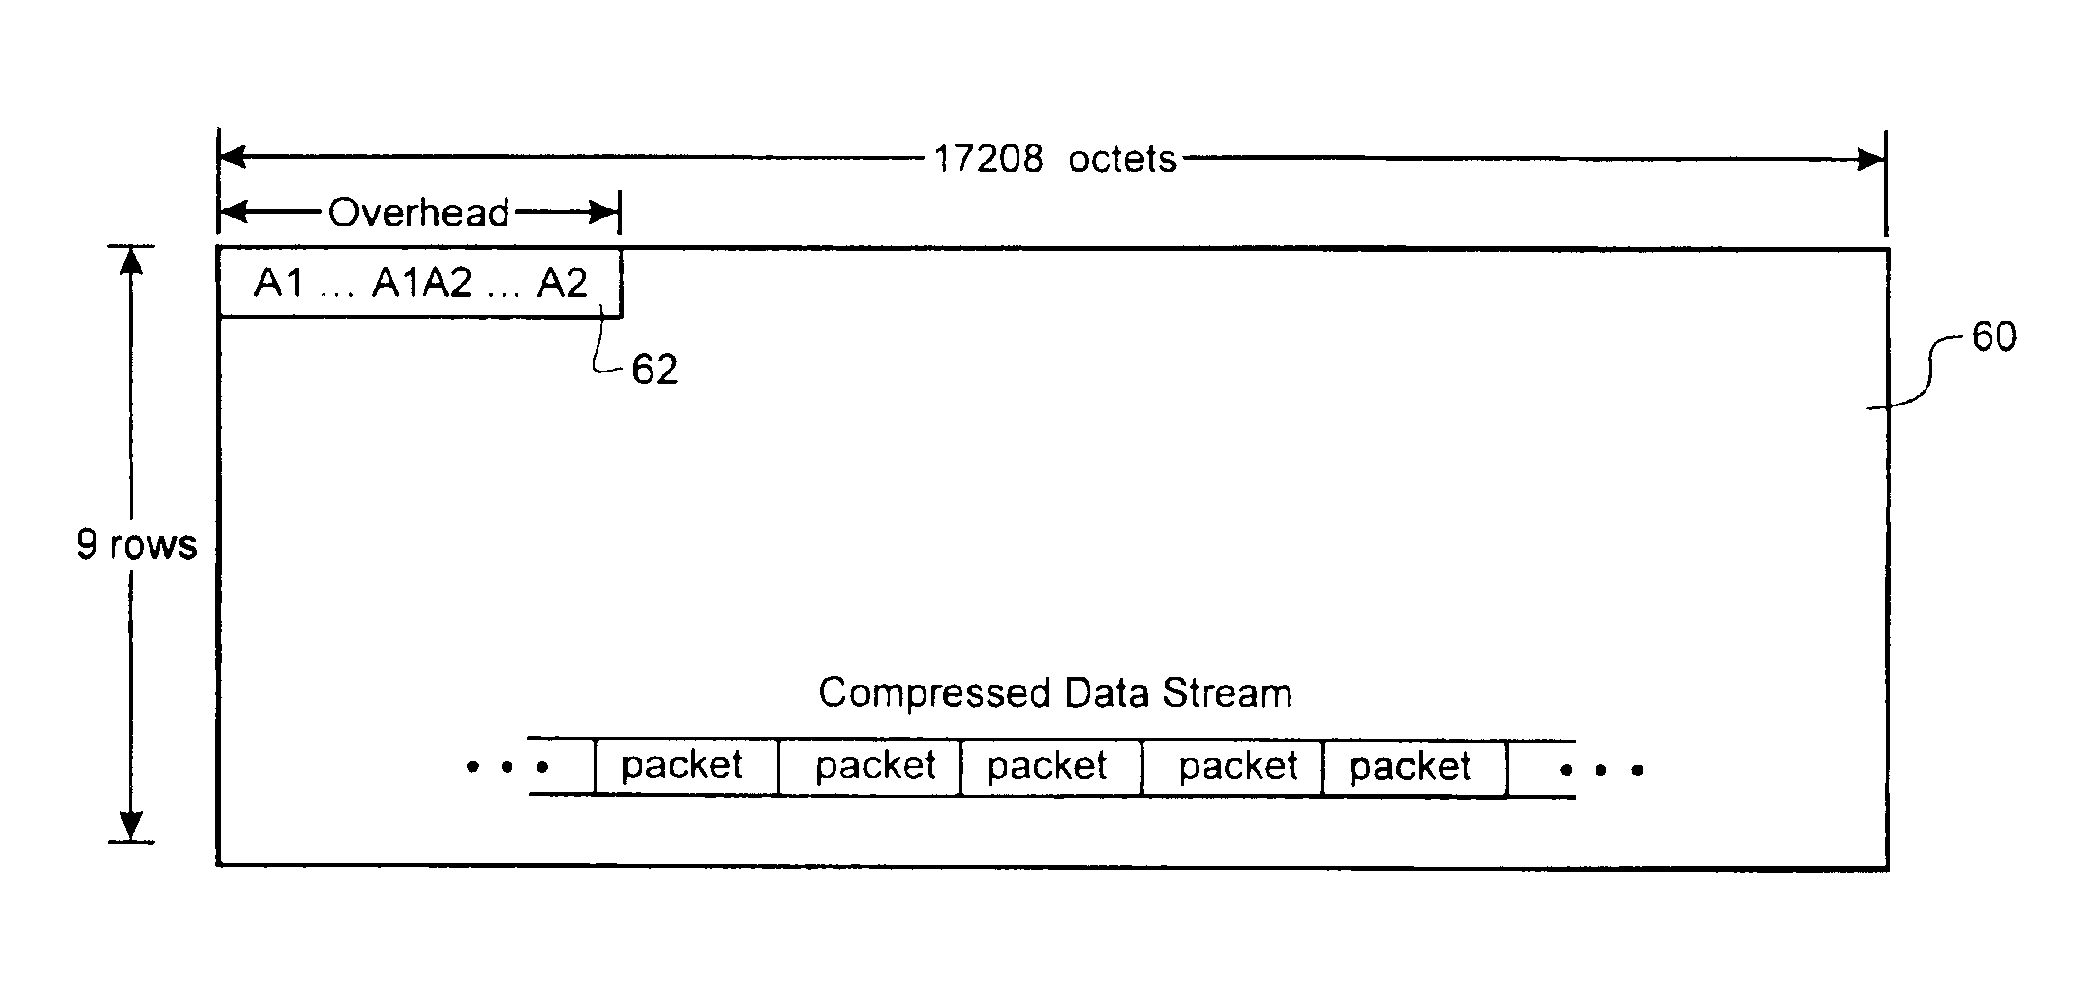 10 Gigabit ethernet mappings for a common LAN/WAN PMD interface with a simple universal physical medium dependent interface